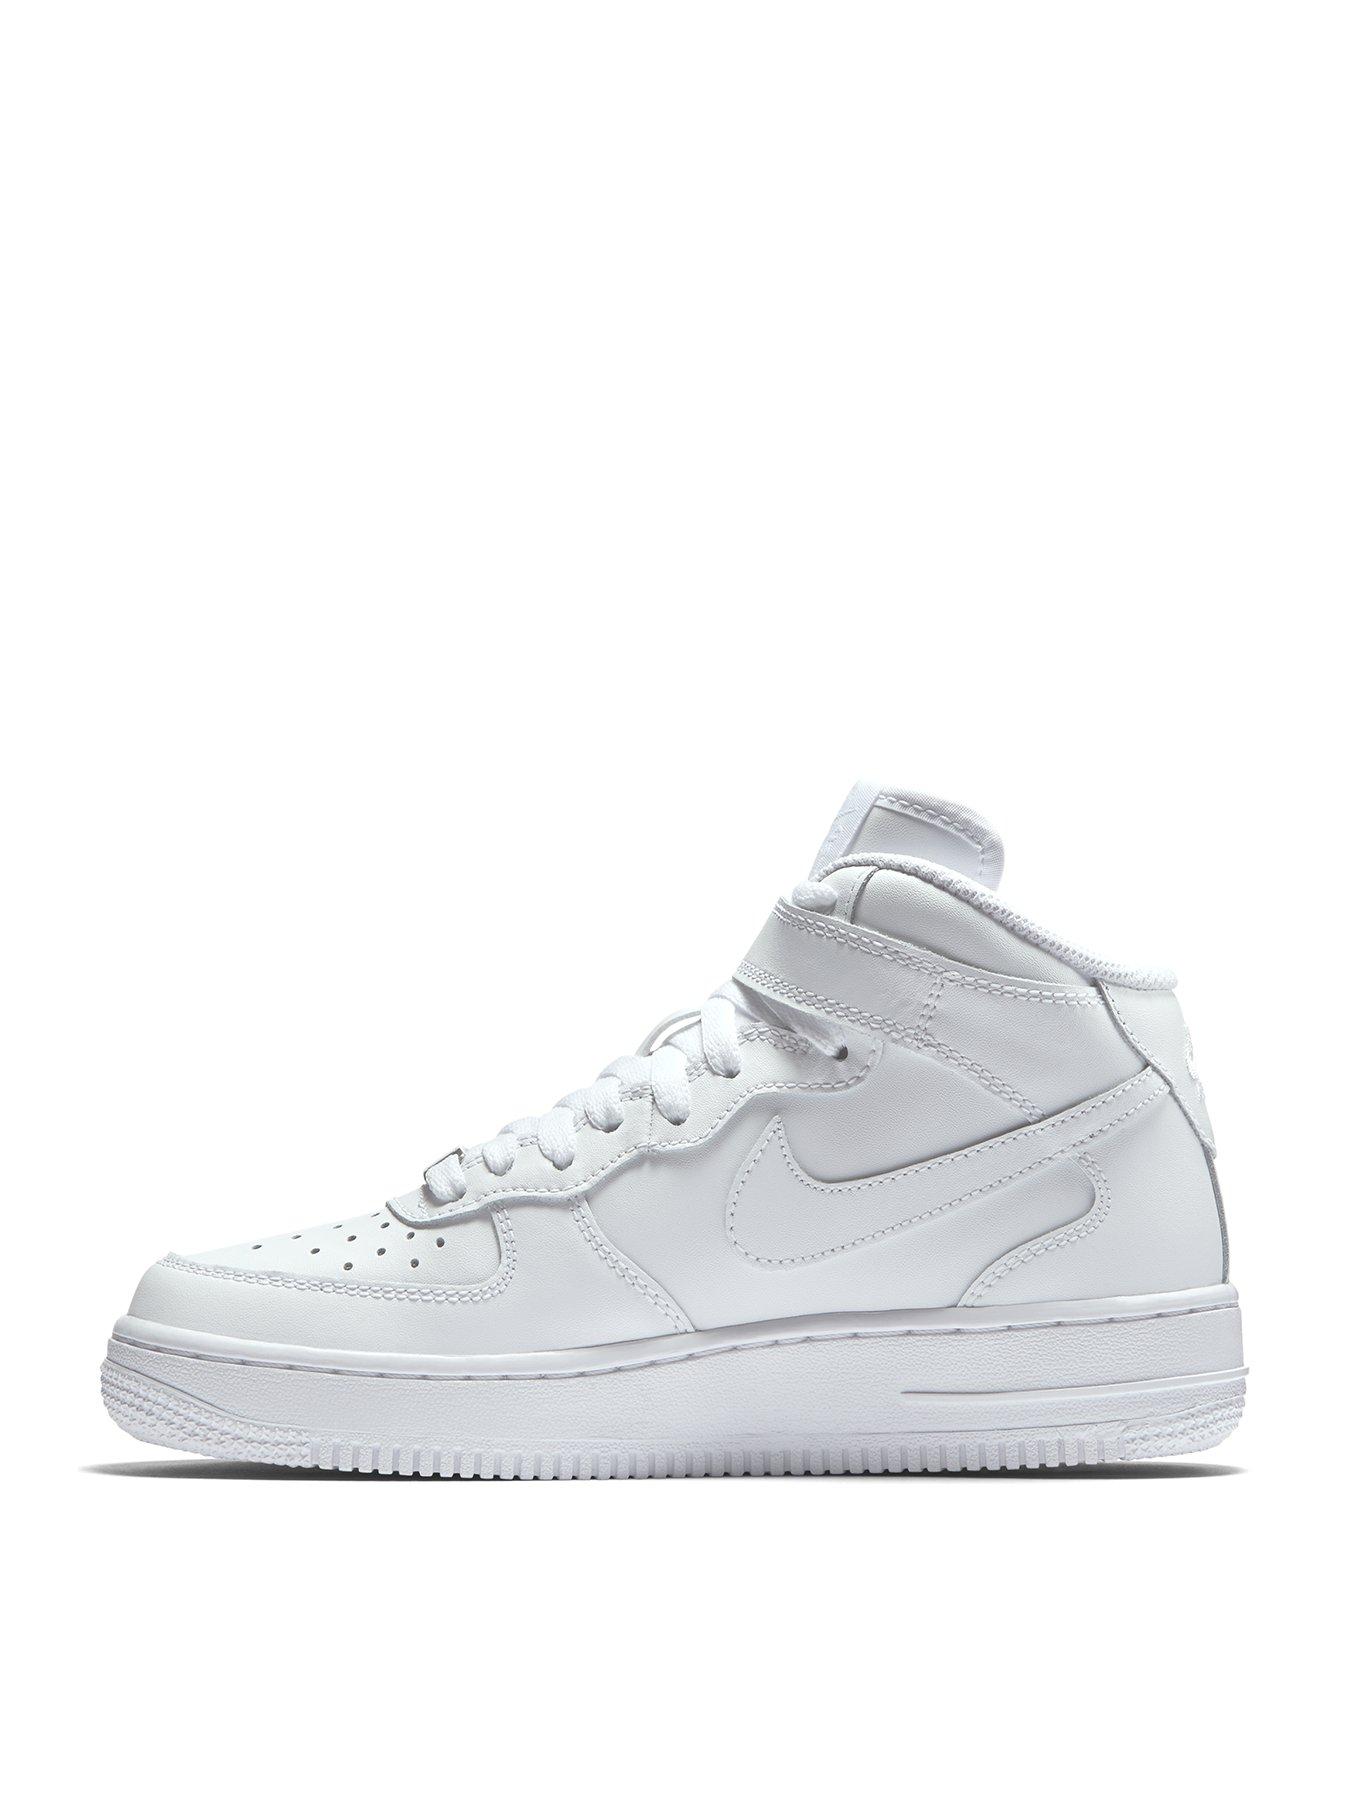 Nike Air Force 1 Mid 06 Junior Trainer 